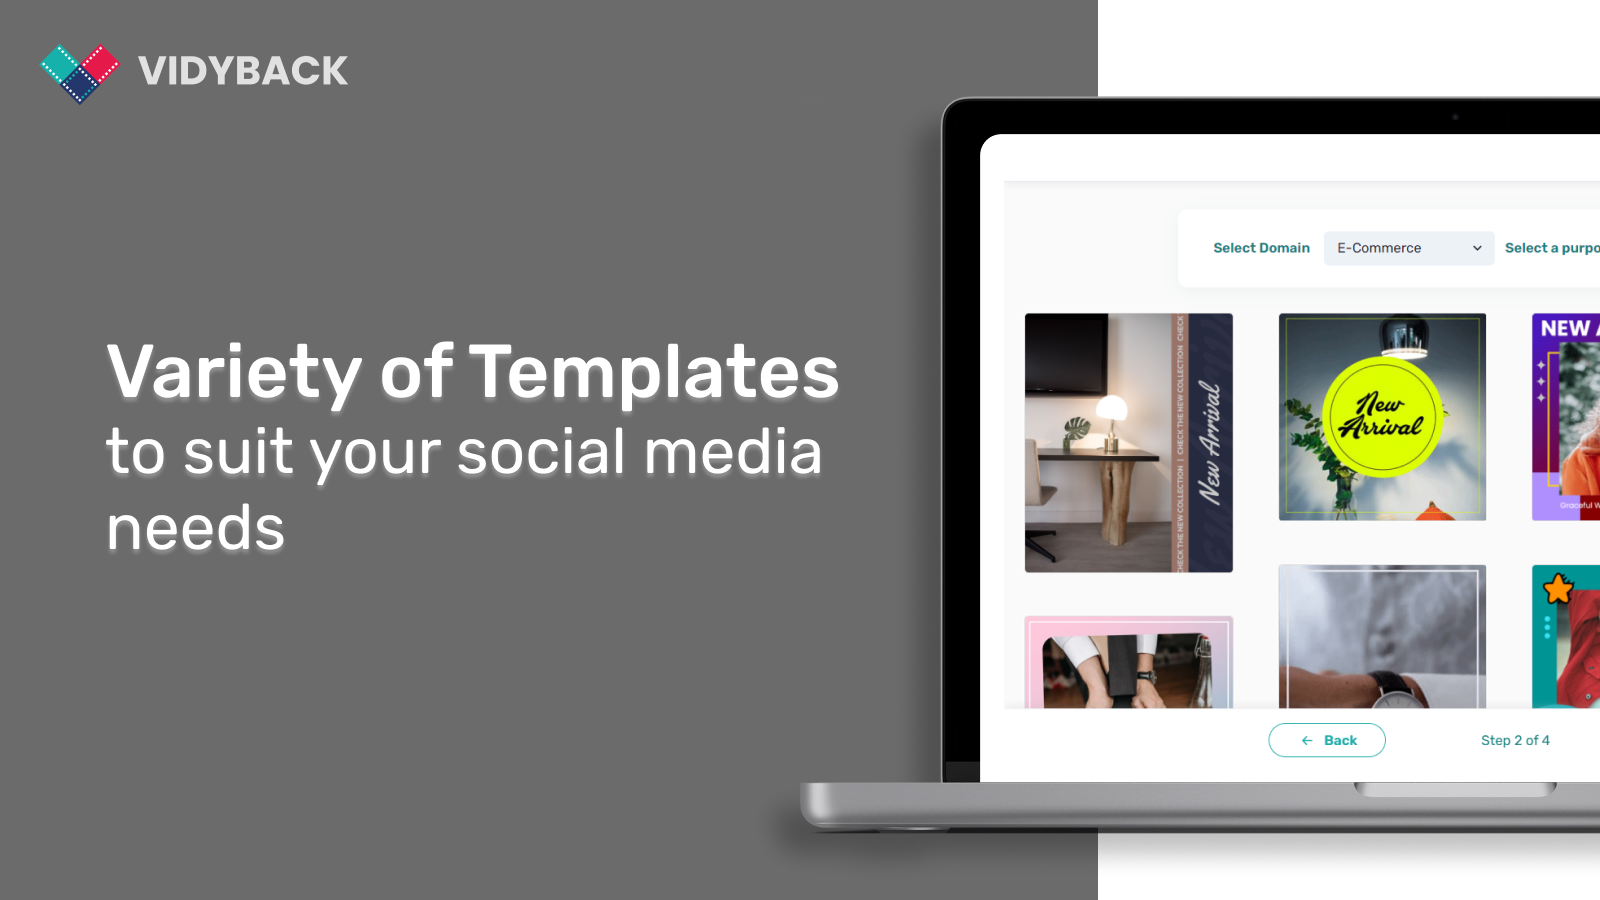 Select a Video Ads template for your Shopify Product.